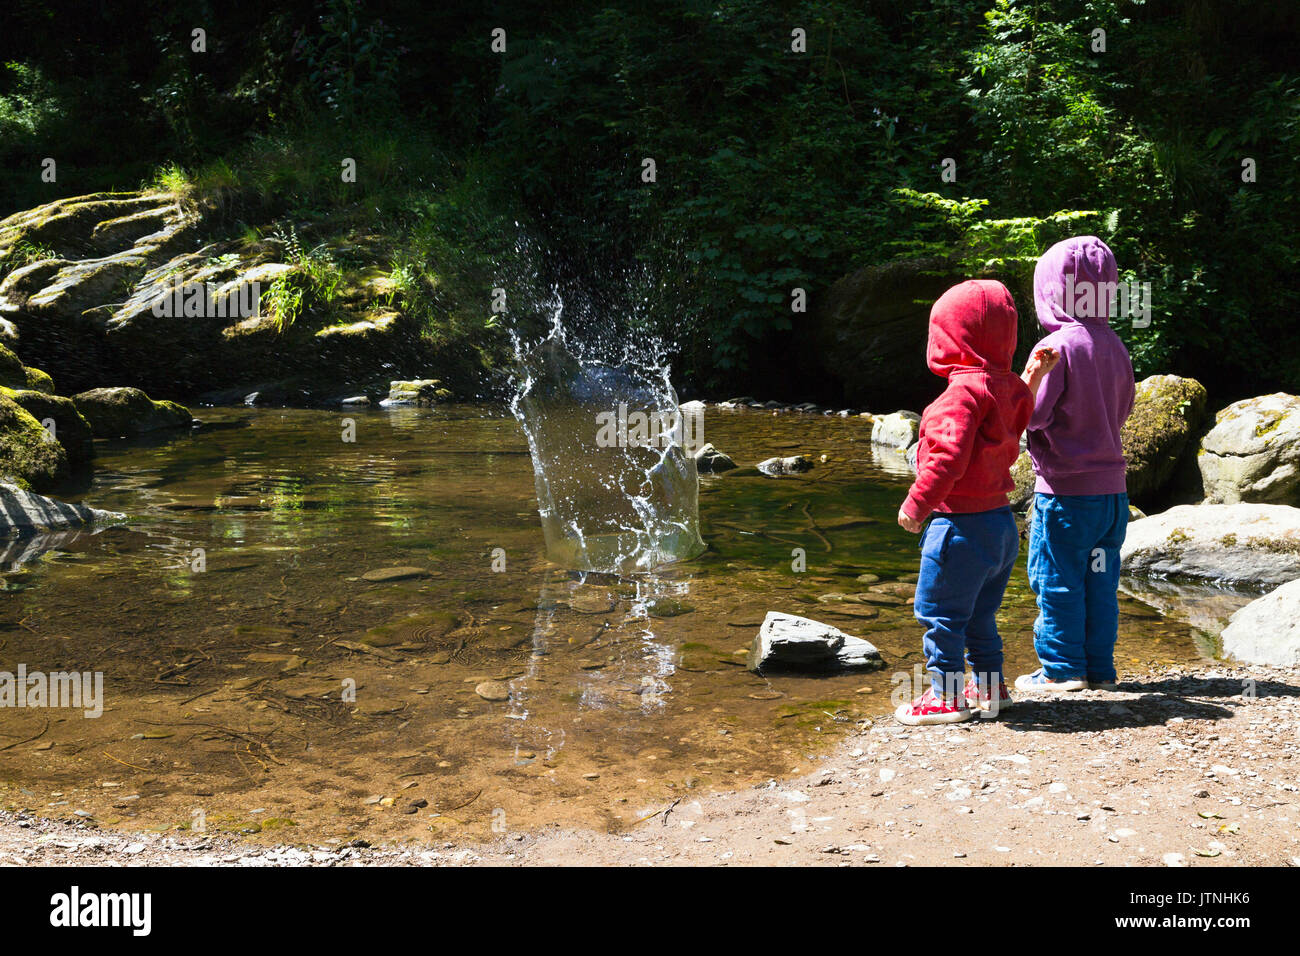 Two young children throwing stones into water Stock Photo